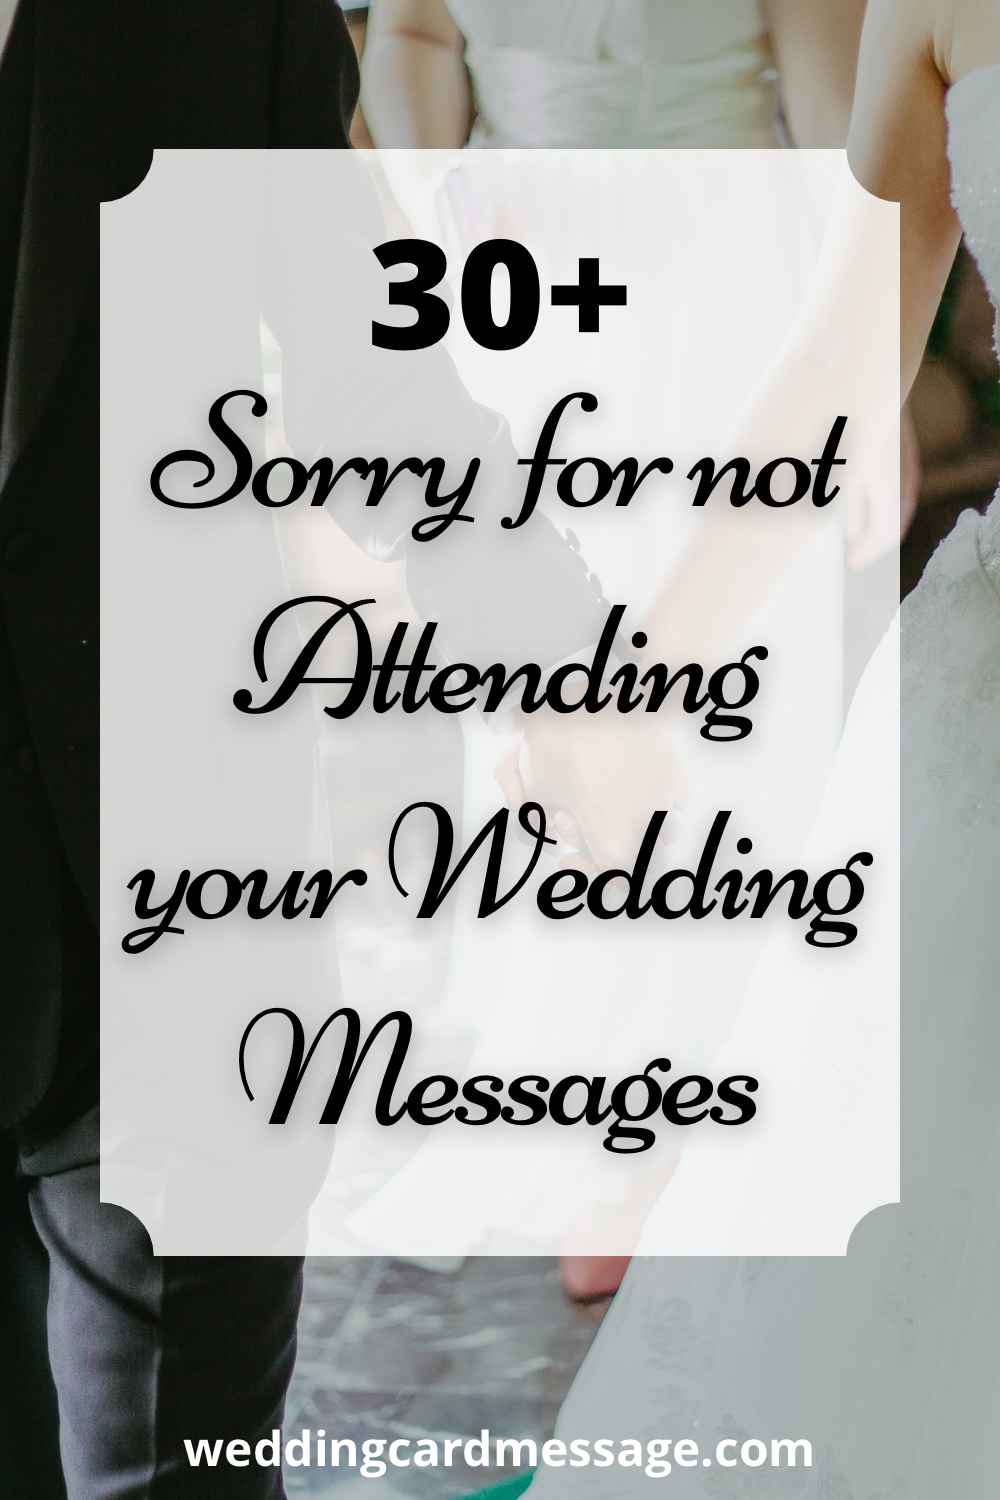 sorry for not attending wedding messages